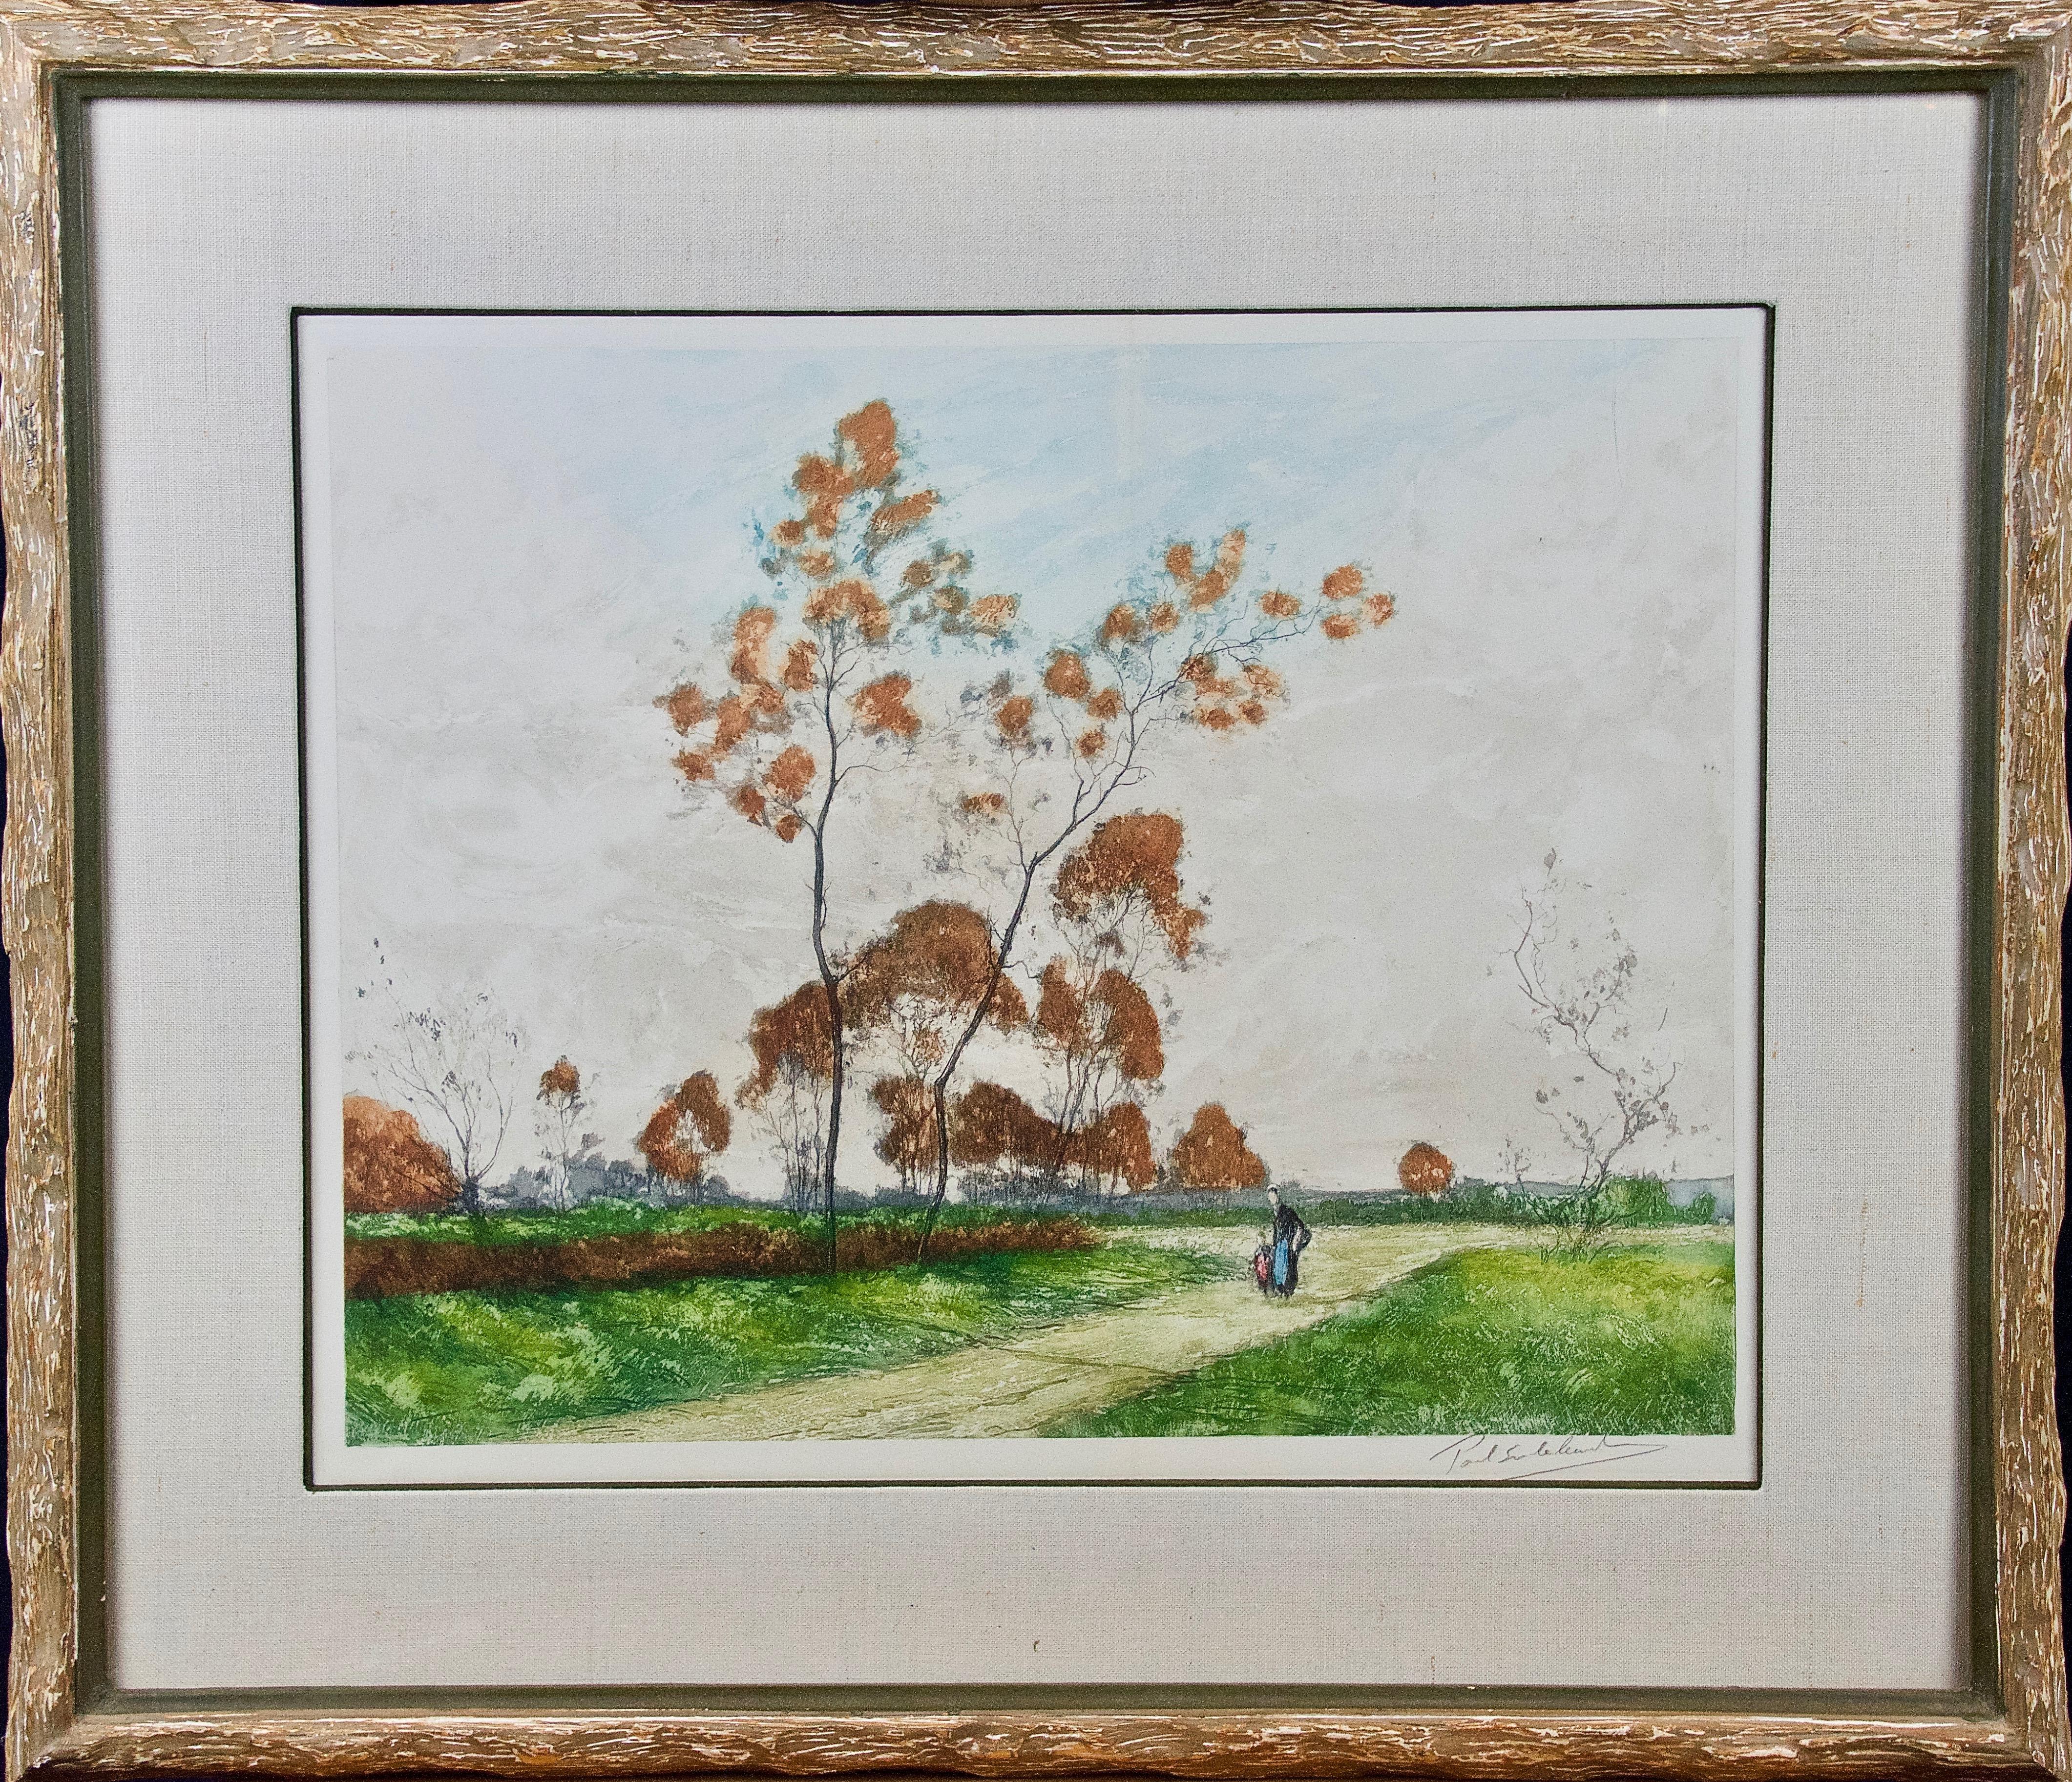 A Signed Etching of a Pastoral Scene in Picardy, France by Paul Emile Lecomte